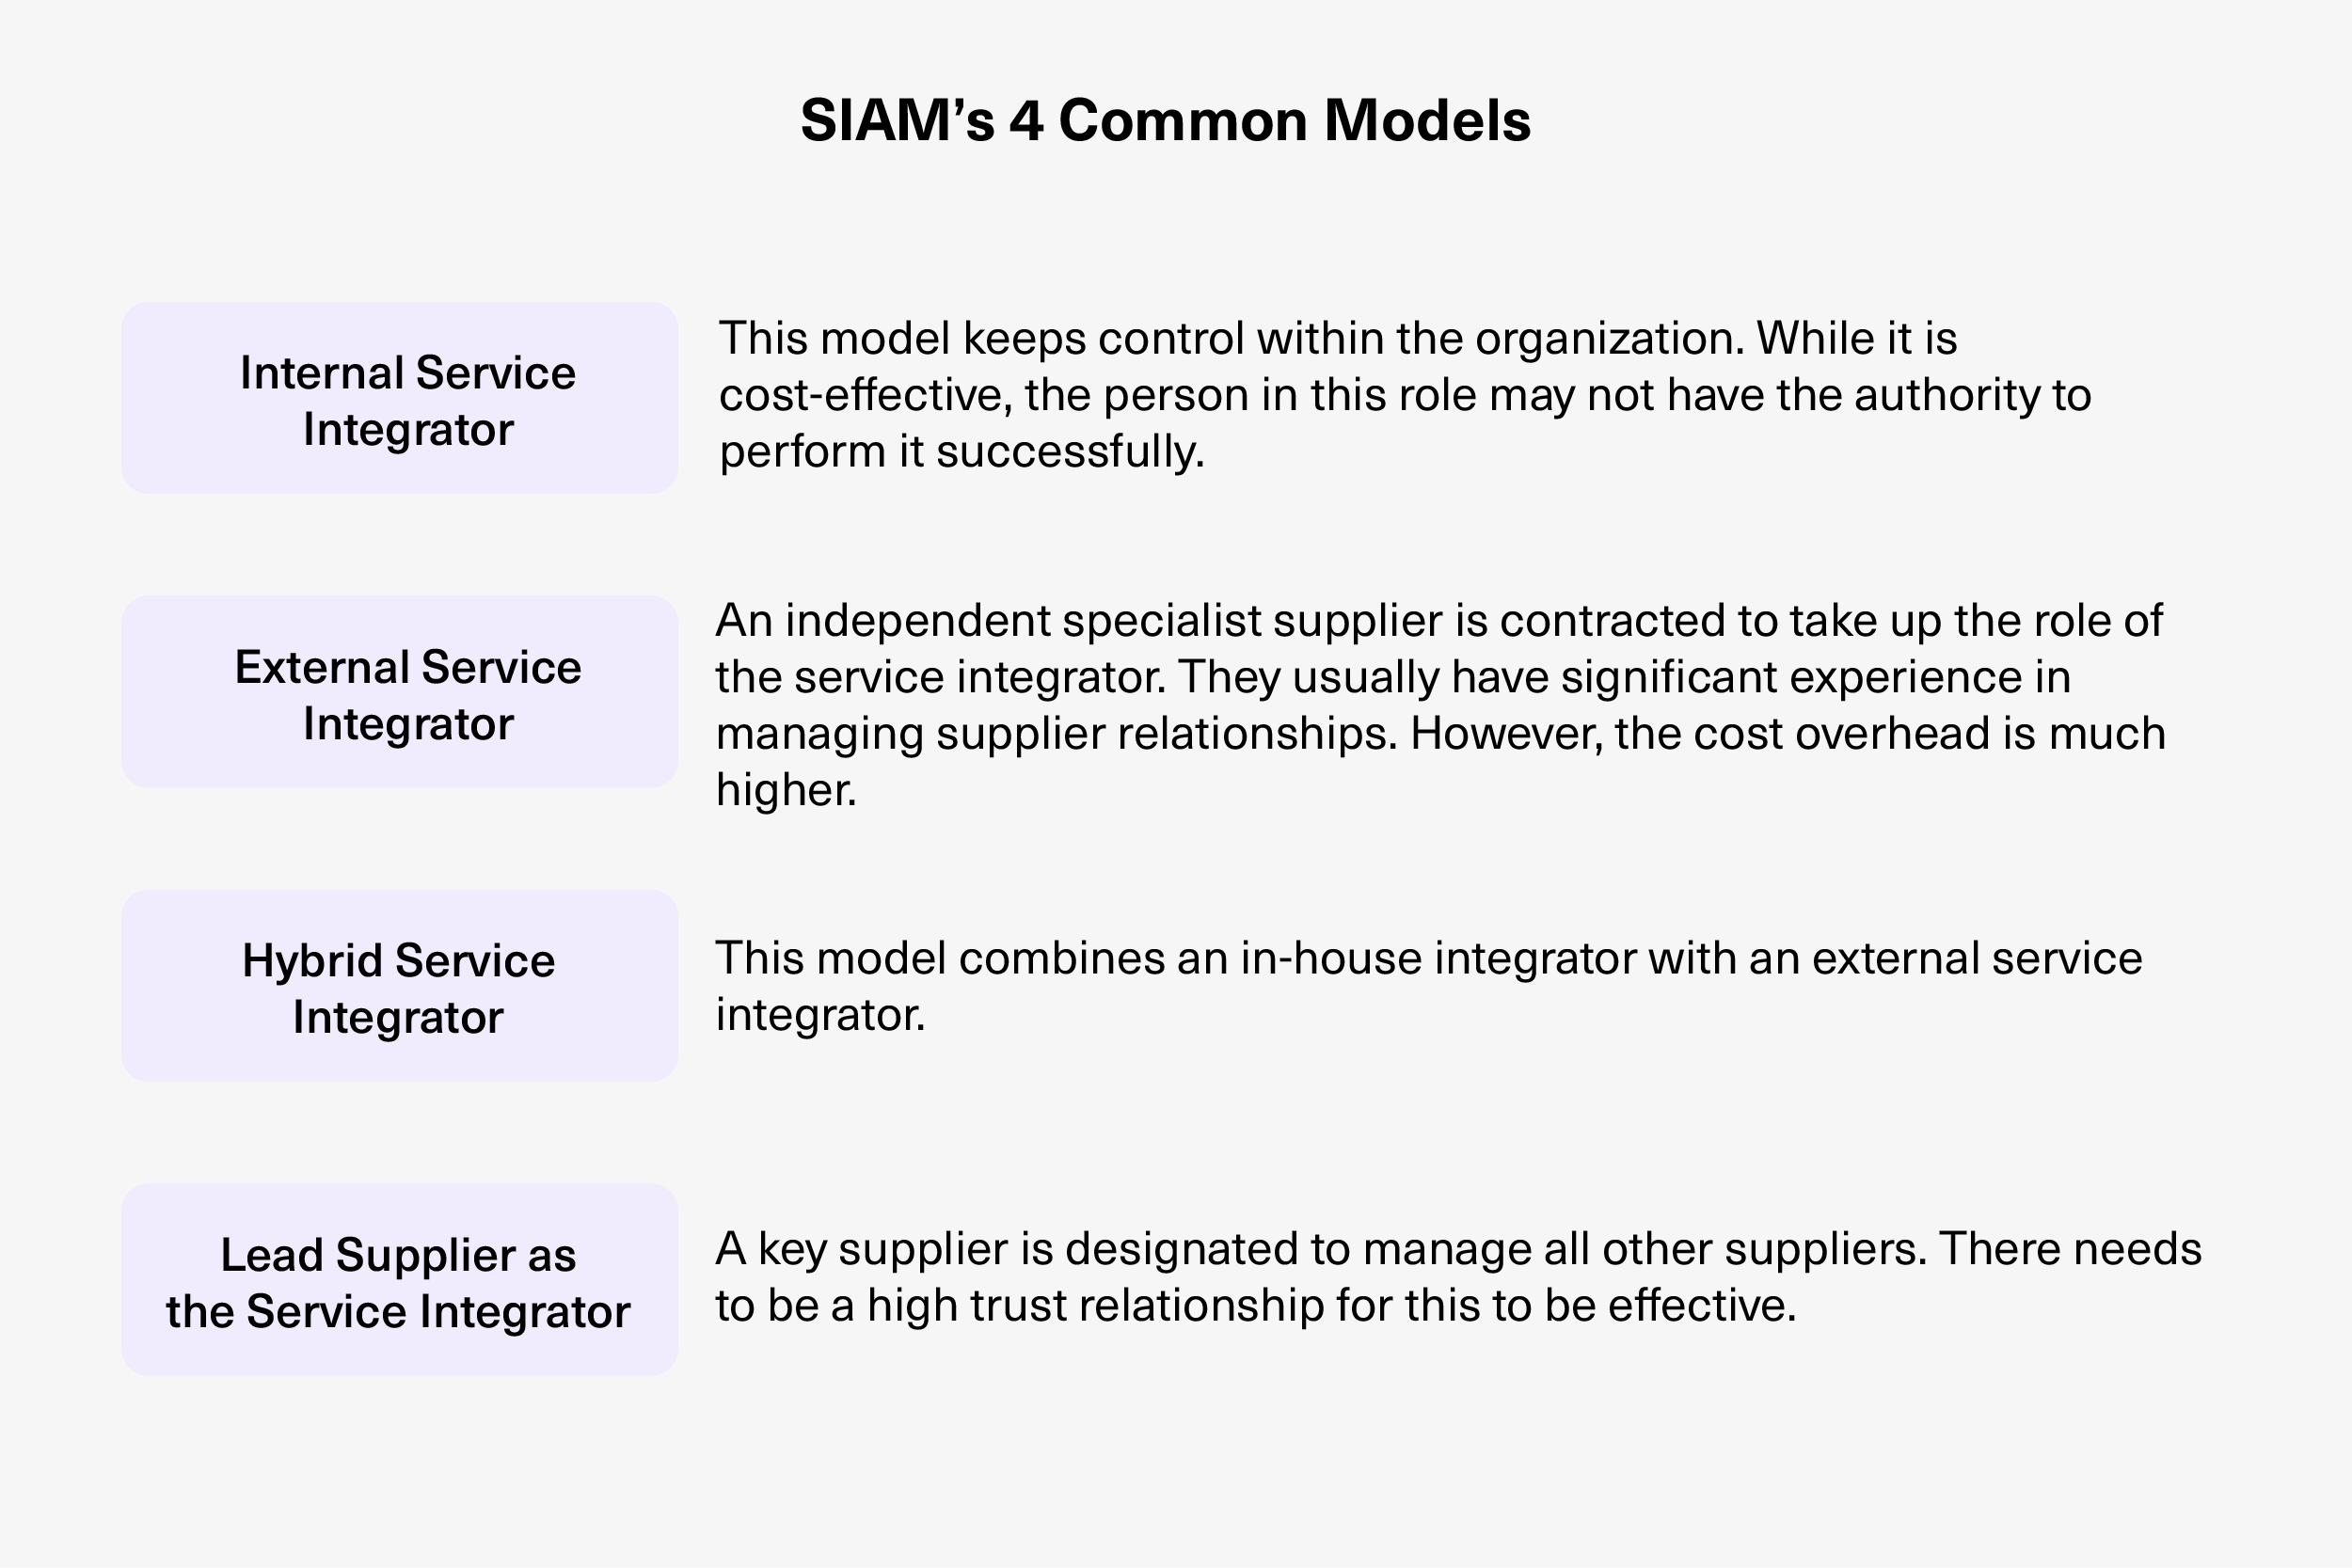 SIAM's four common model table and explanation